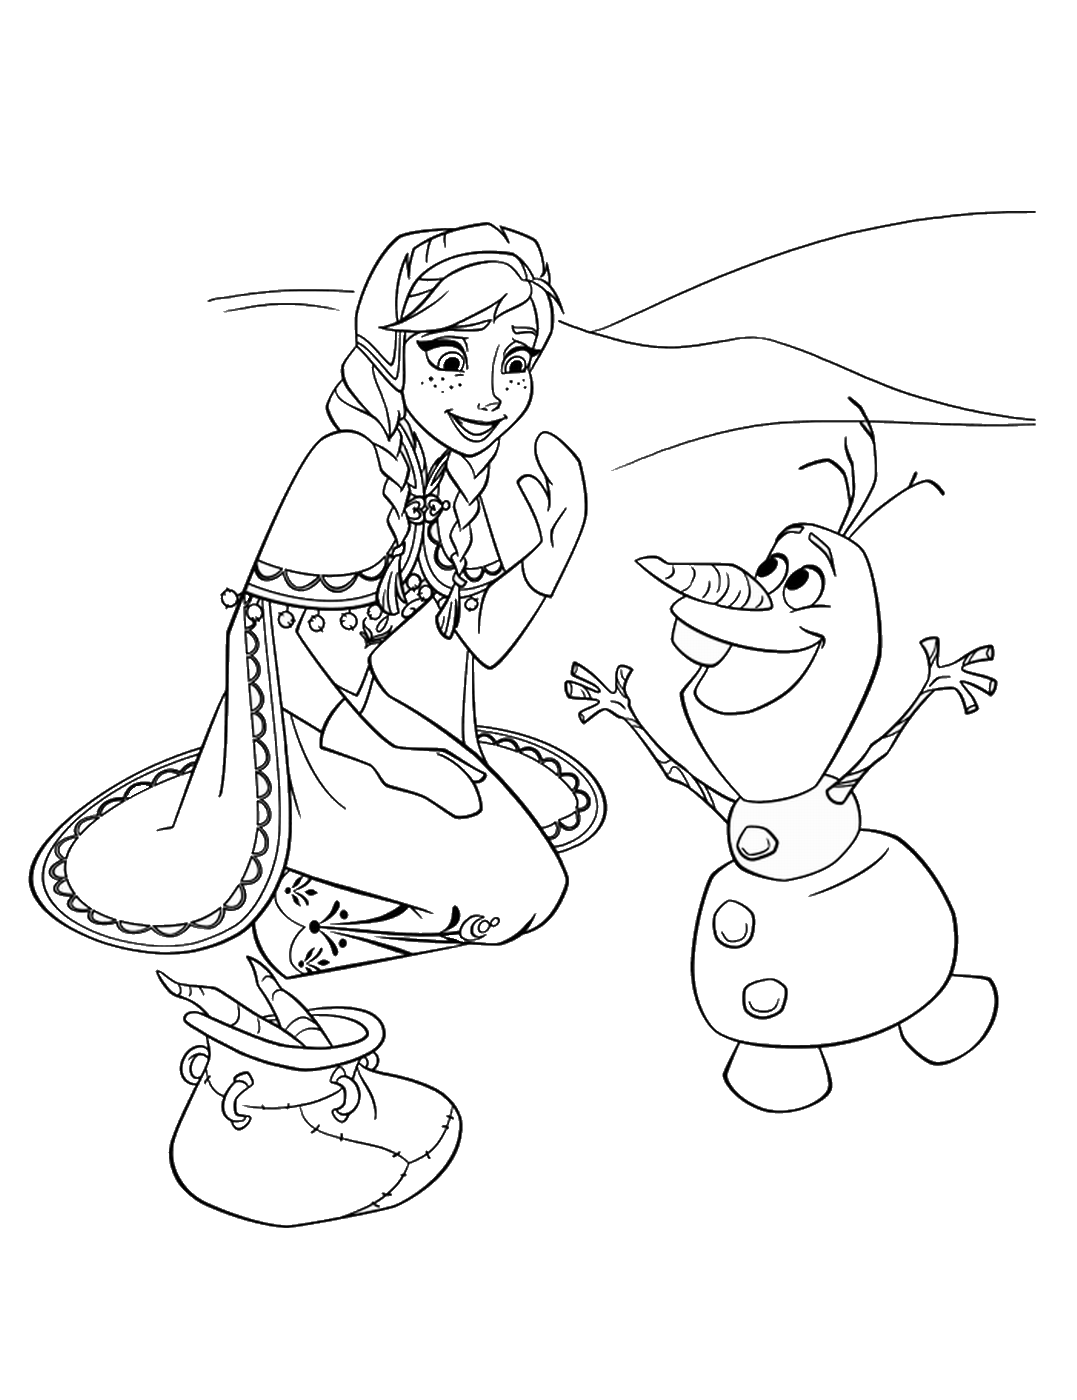 Frozen Coloring Pages TV Film frozen_coloring_22 Printable 2020 03139 Coloring4free